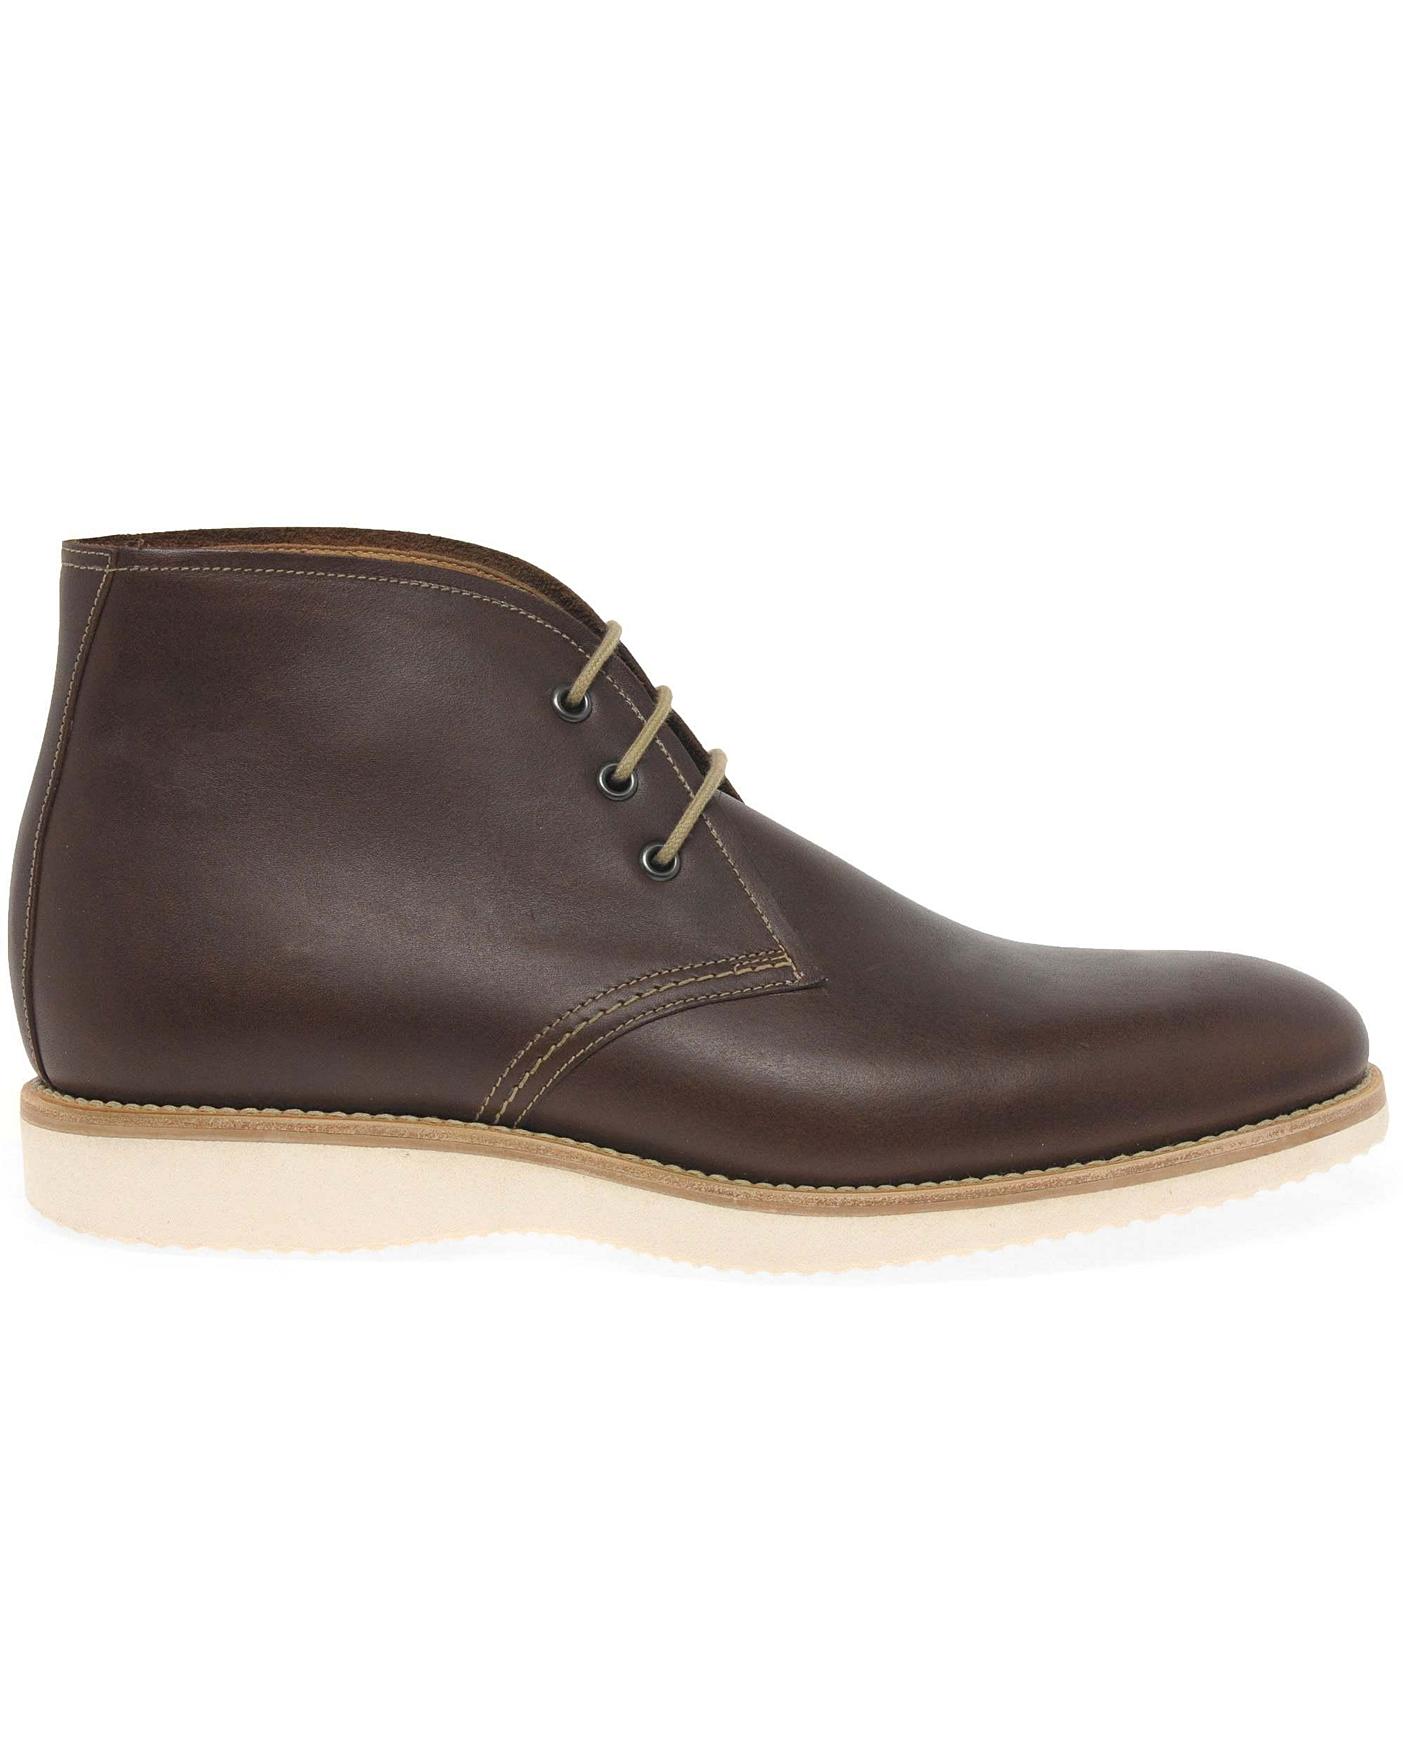 Loake Python Wide Fit Mens Chukka Boots 